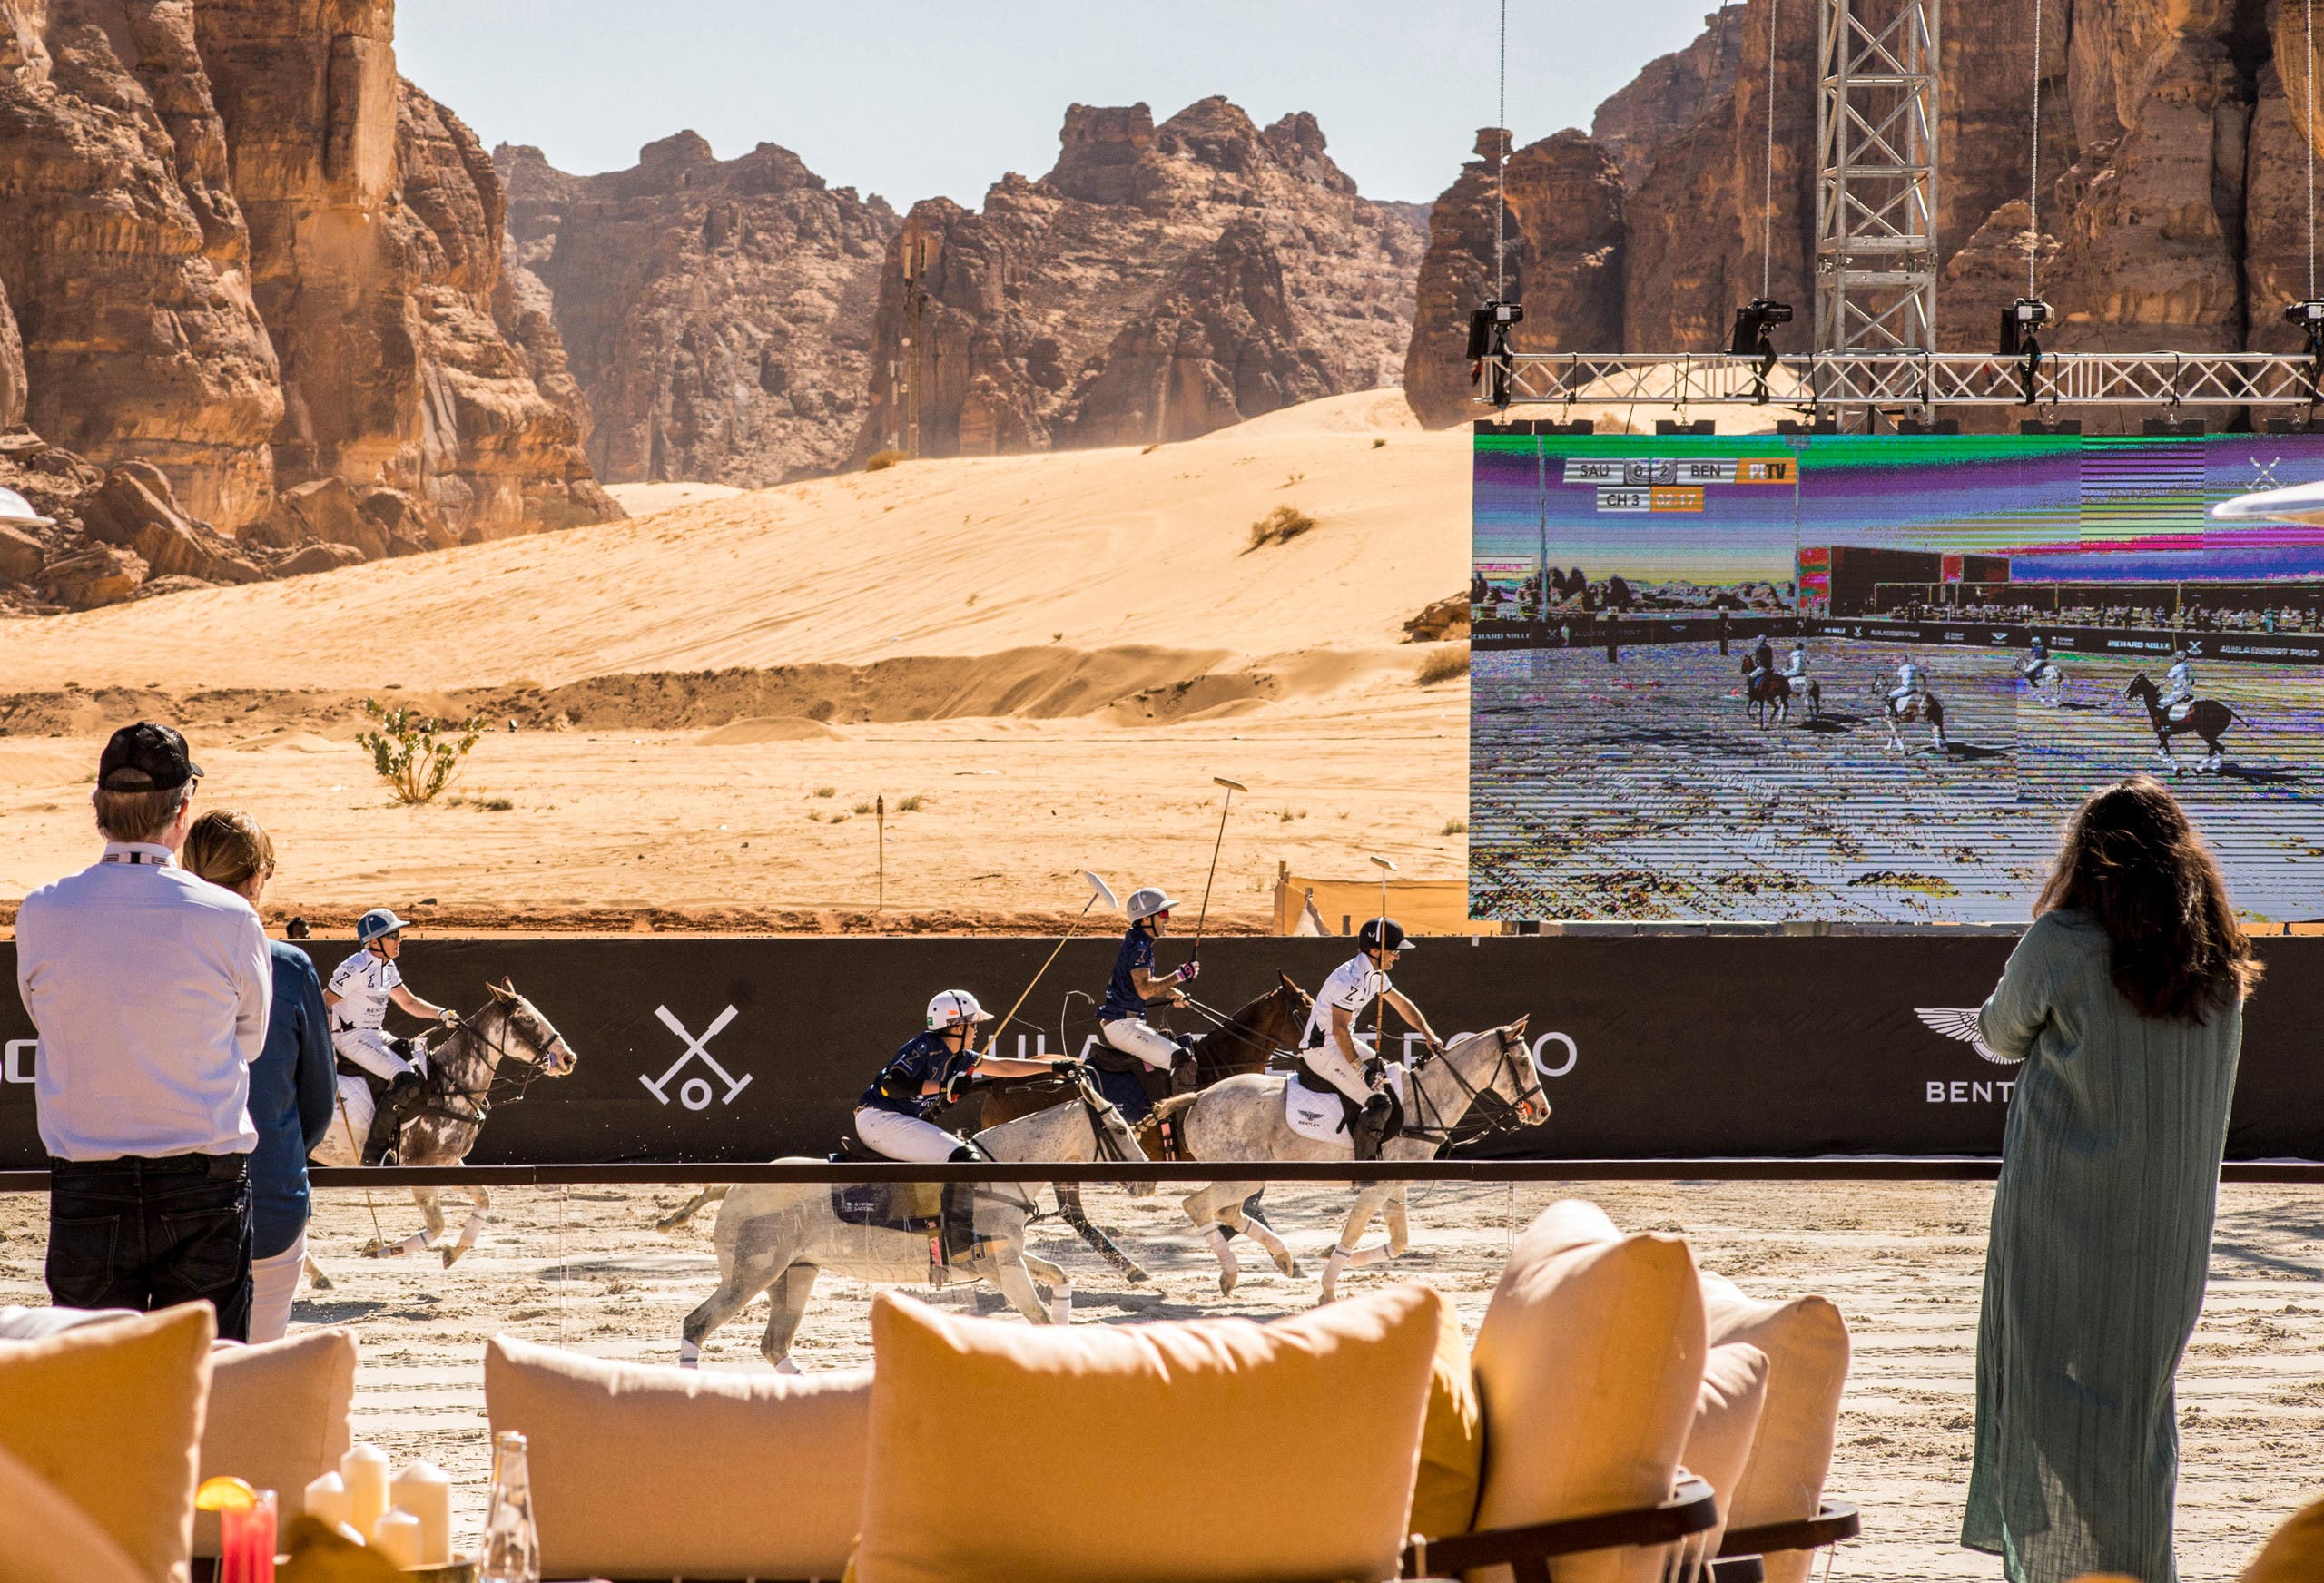 222This handout image provided by AlUla Desert Polo 2022 championship shows spectators watching players during the tournament in Saudi Arabia's northwestern city of al-Ula on February 11, 2022. (AFP)